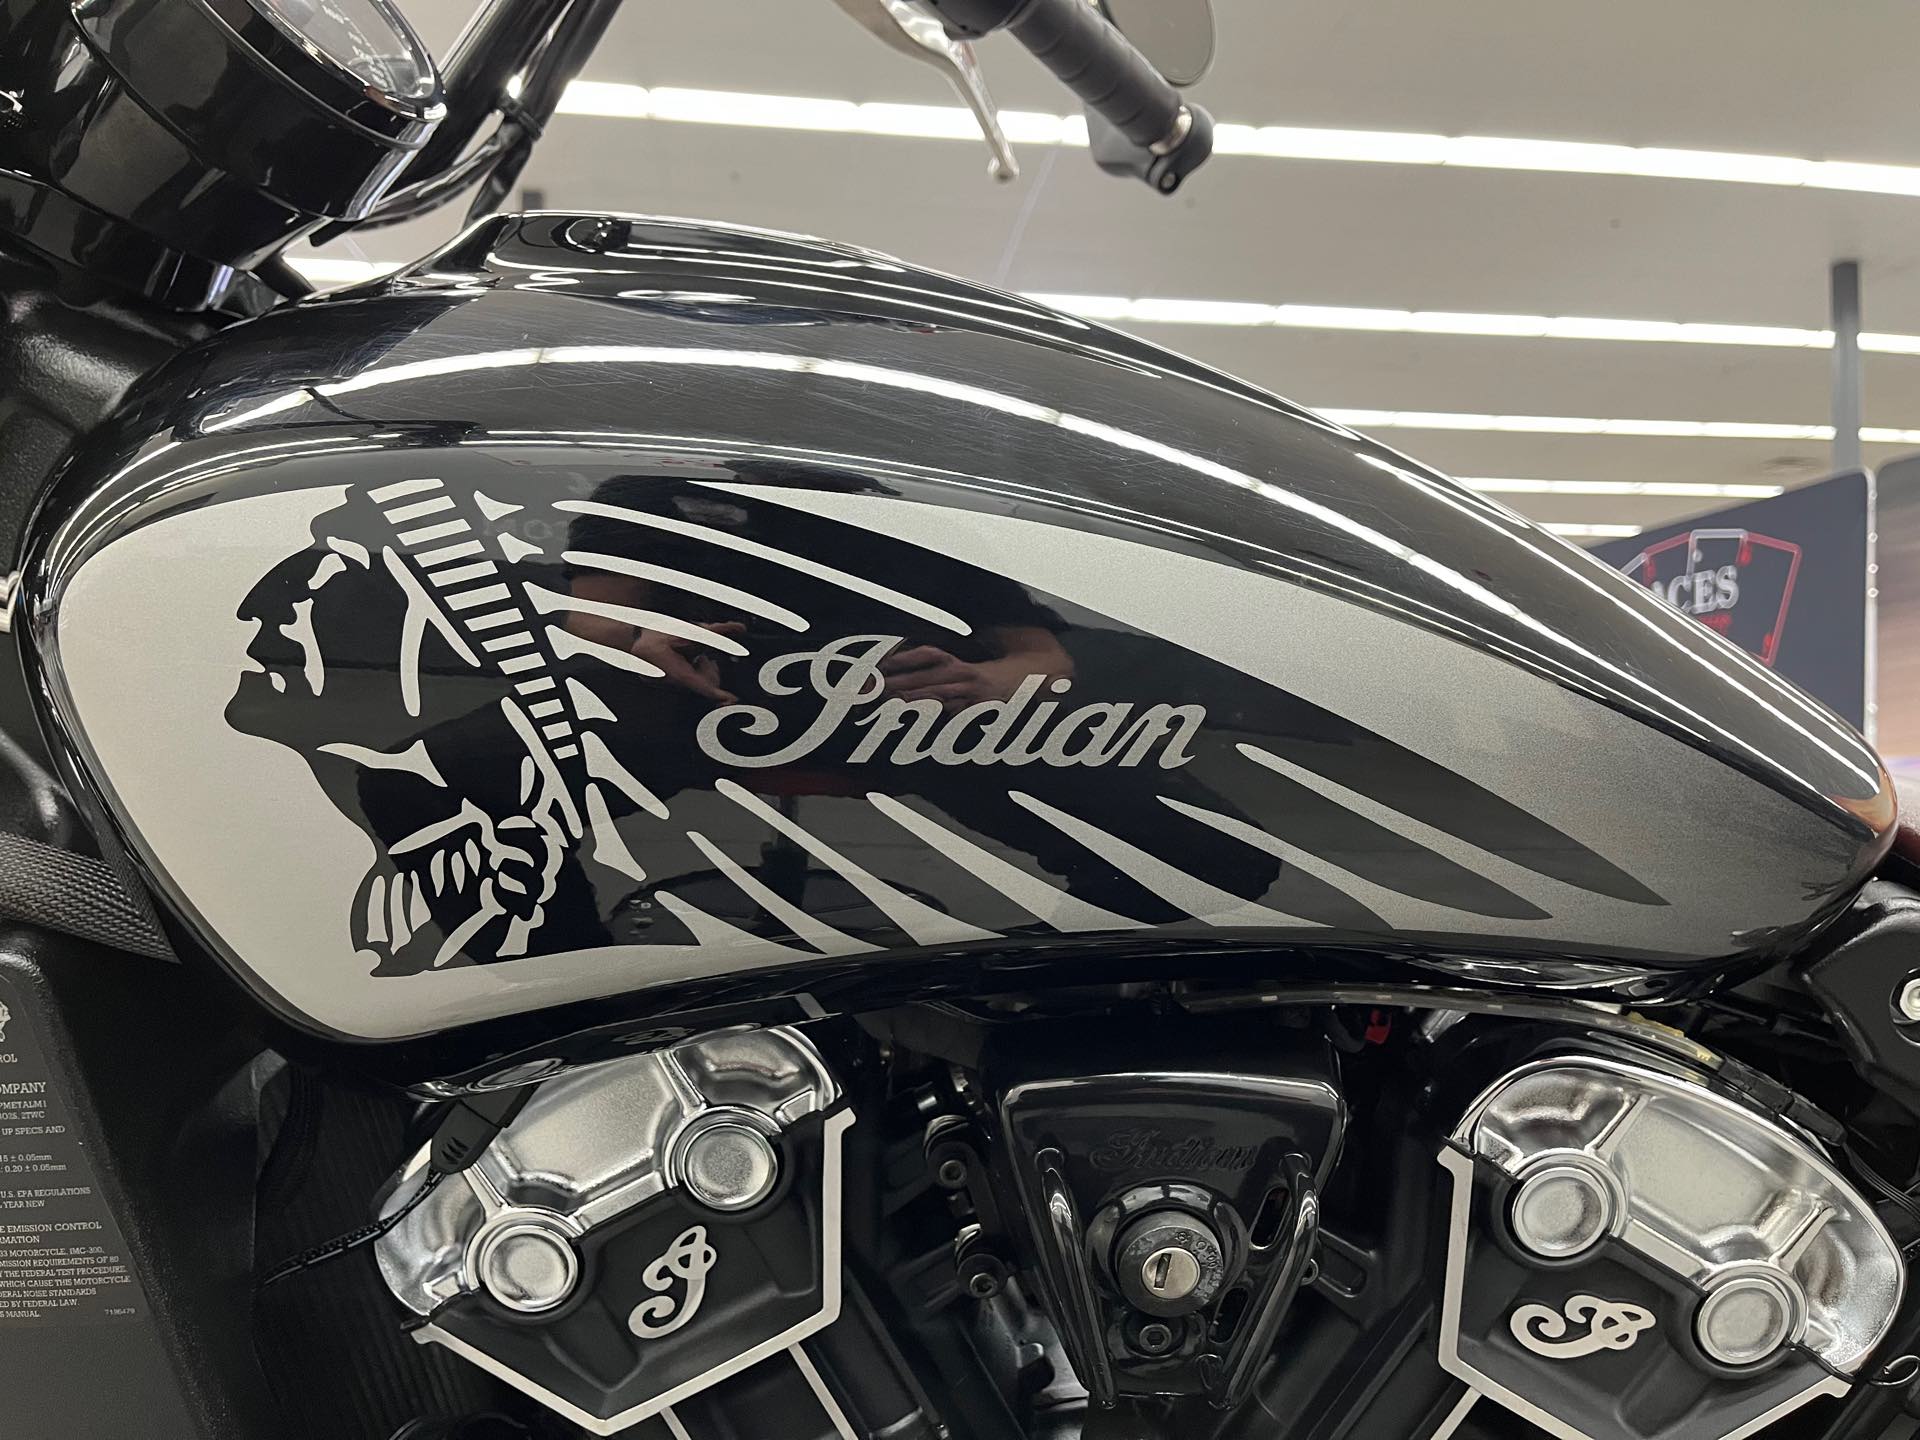 2022 Indian Motorcycle Scout Bobber Twenty at Aces Motorcycles - Denver